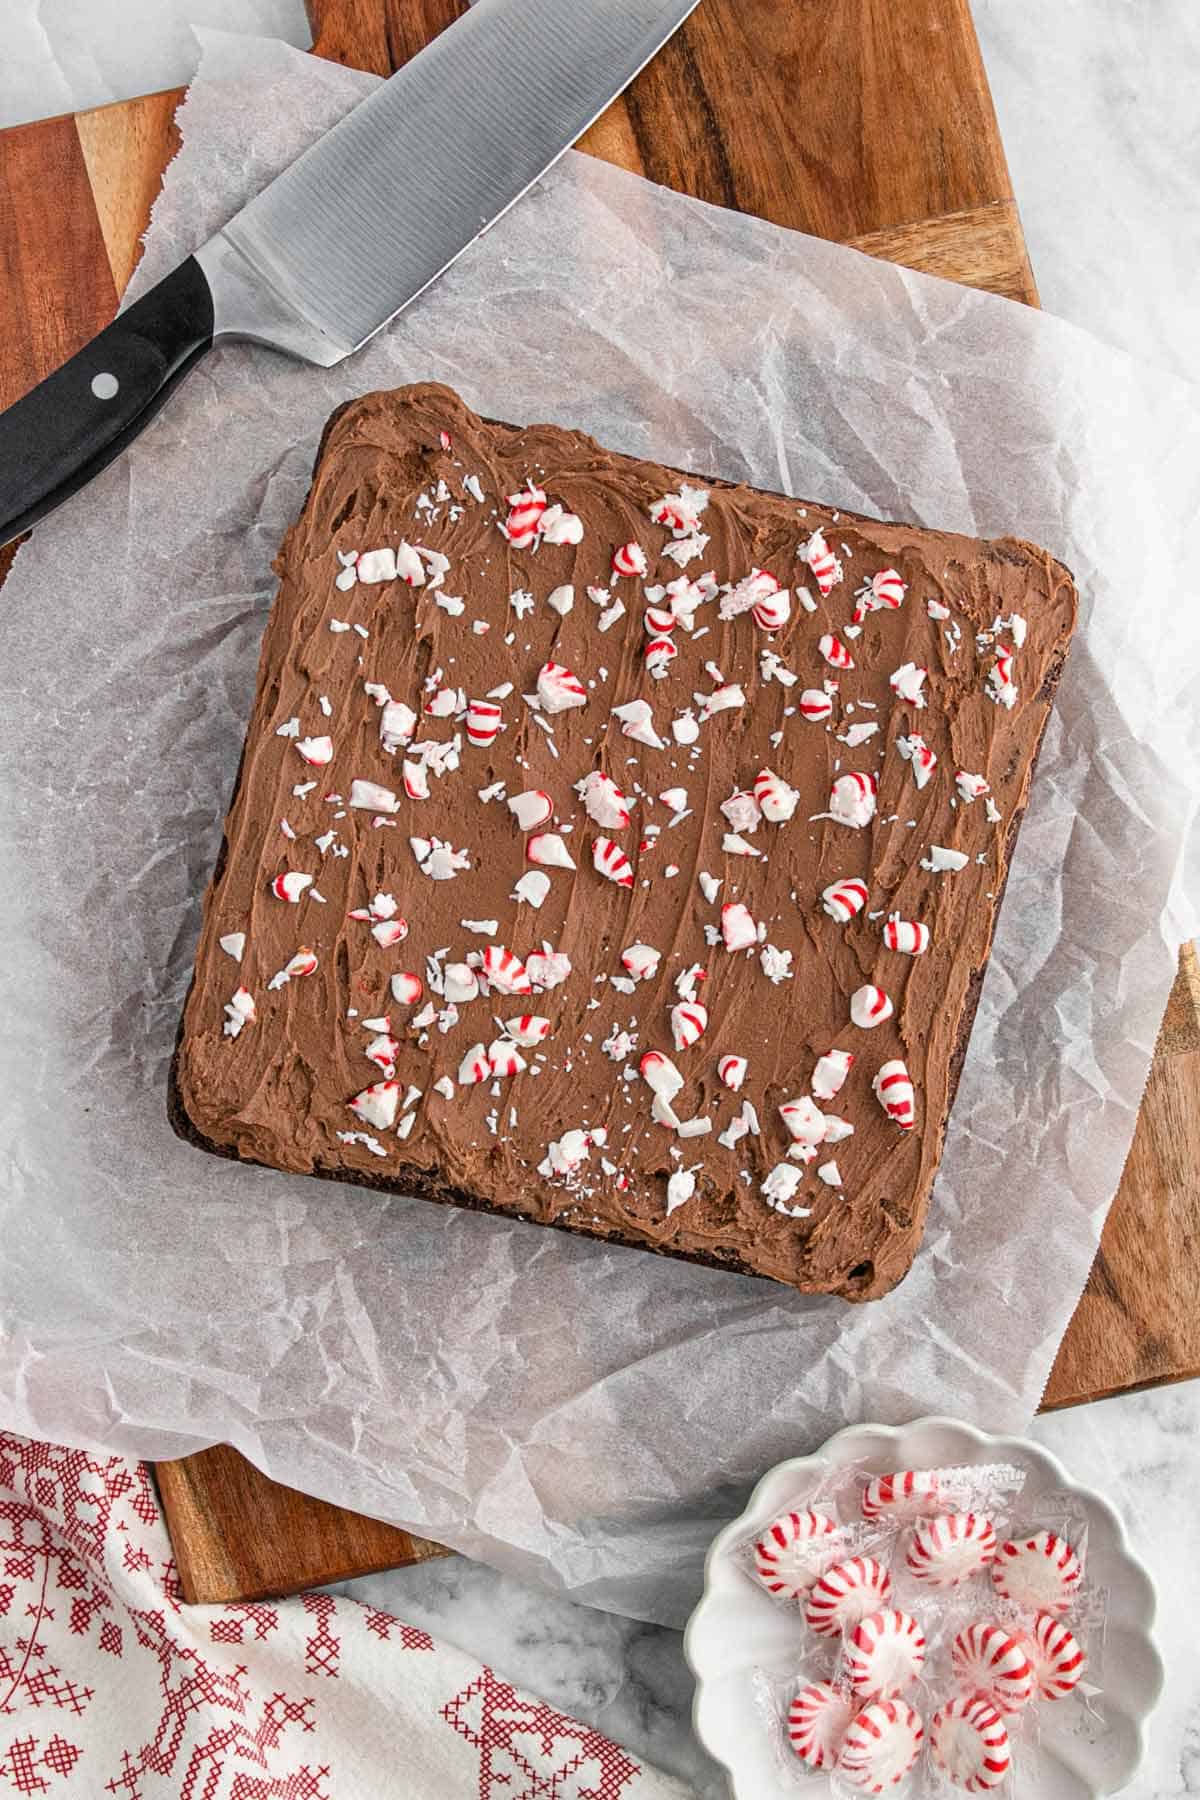 Peppermint brownies with frosting and peppermints on top on parchment ready to cut into pieces.